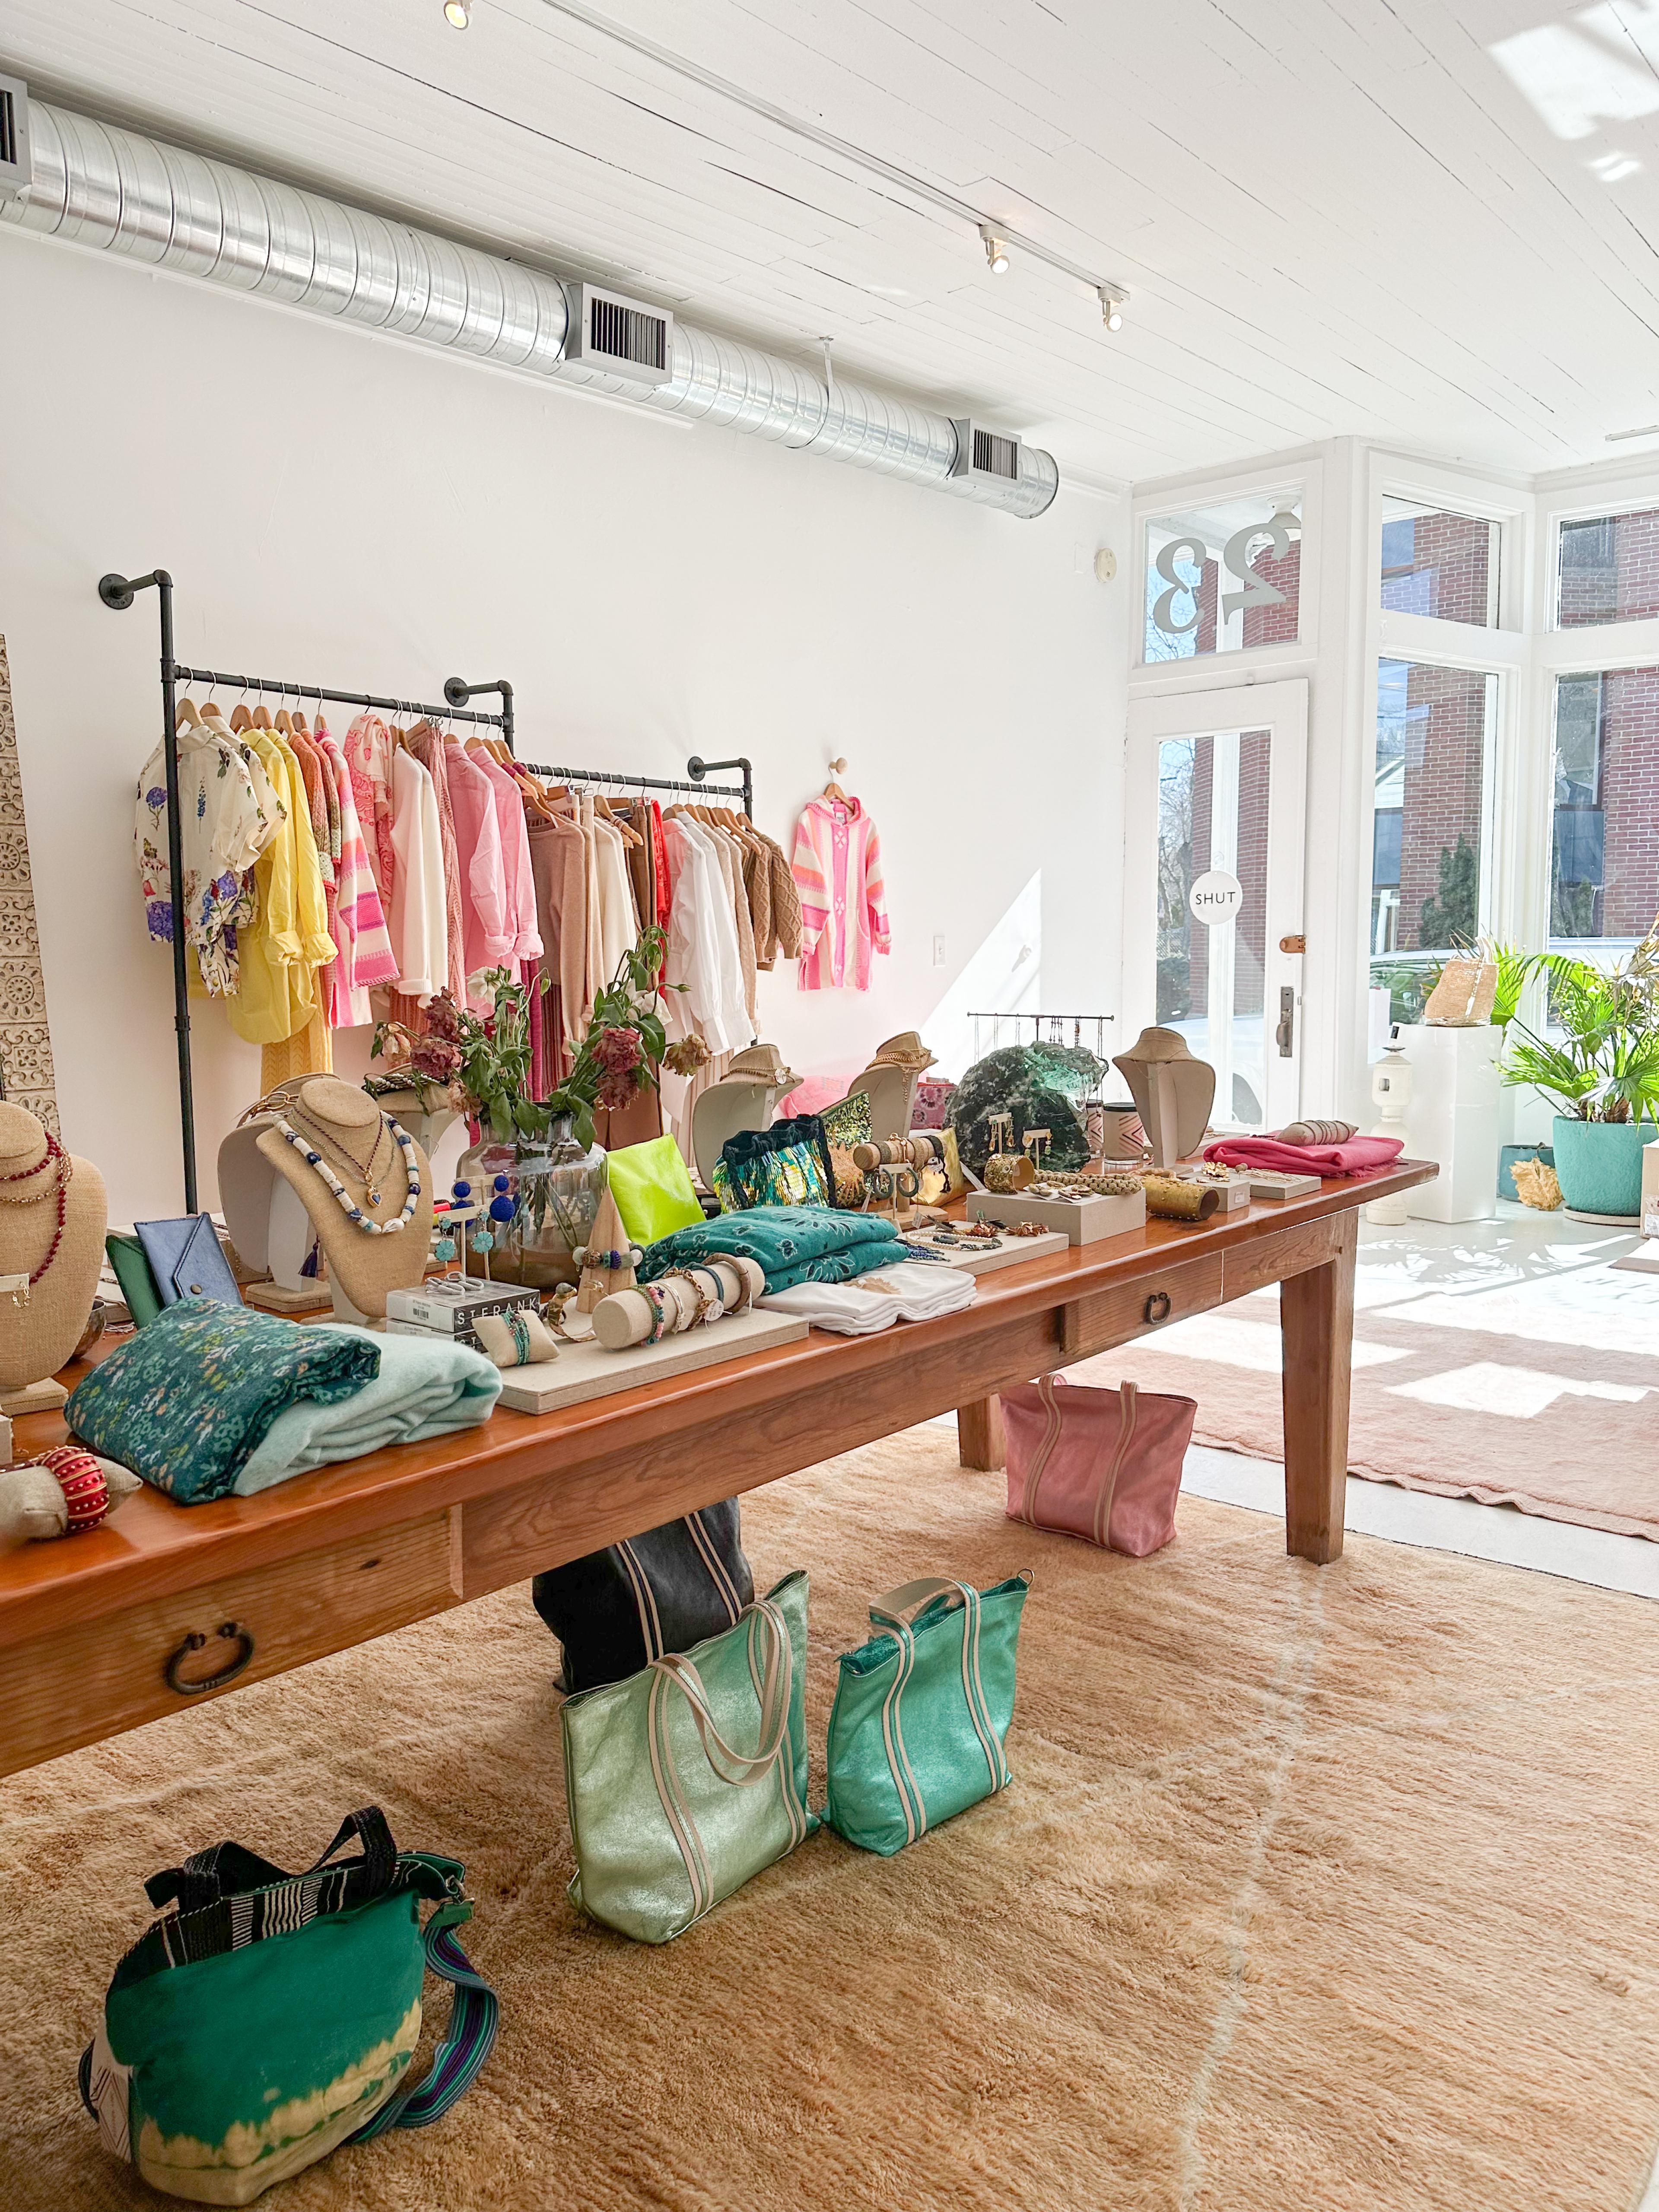 women's clothing store with pink and yellow clothes hanging from metal racks along white painted wall and also a wooden table in foreground with ladies' accessories